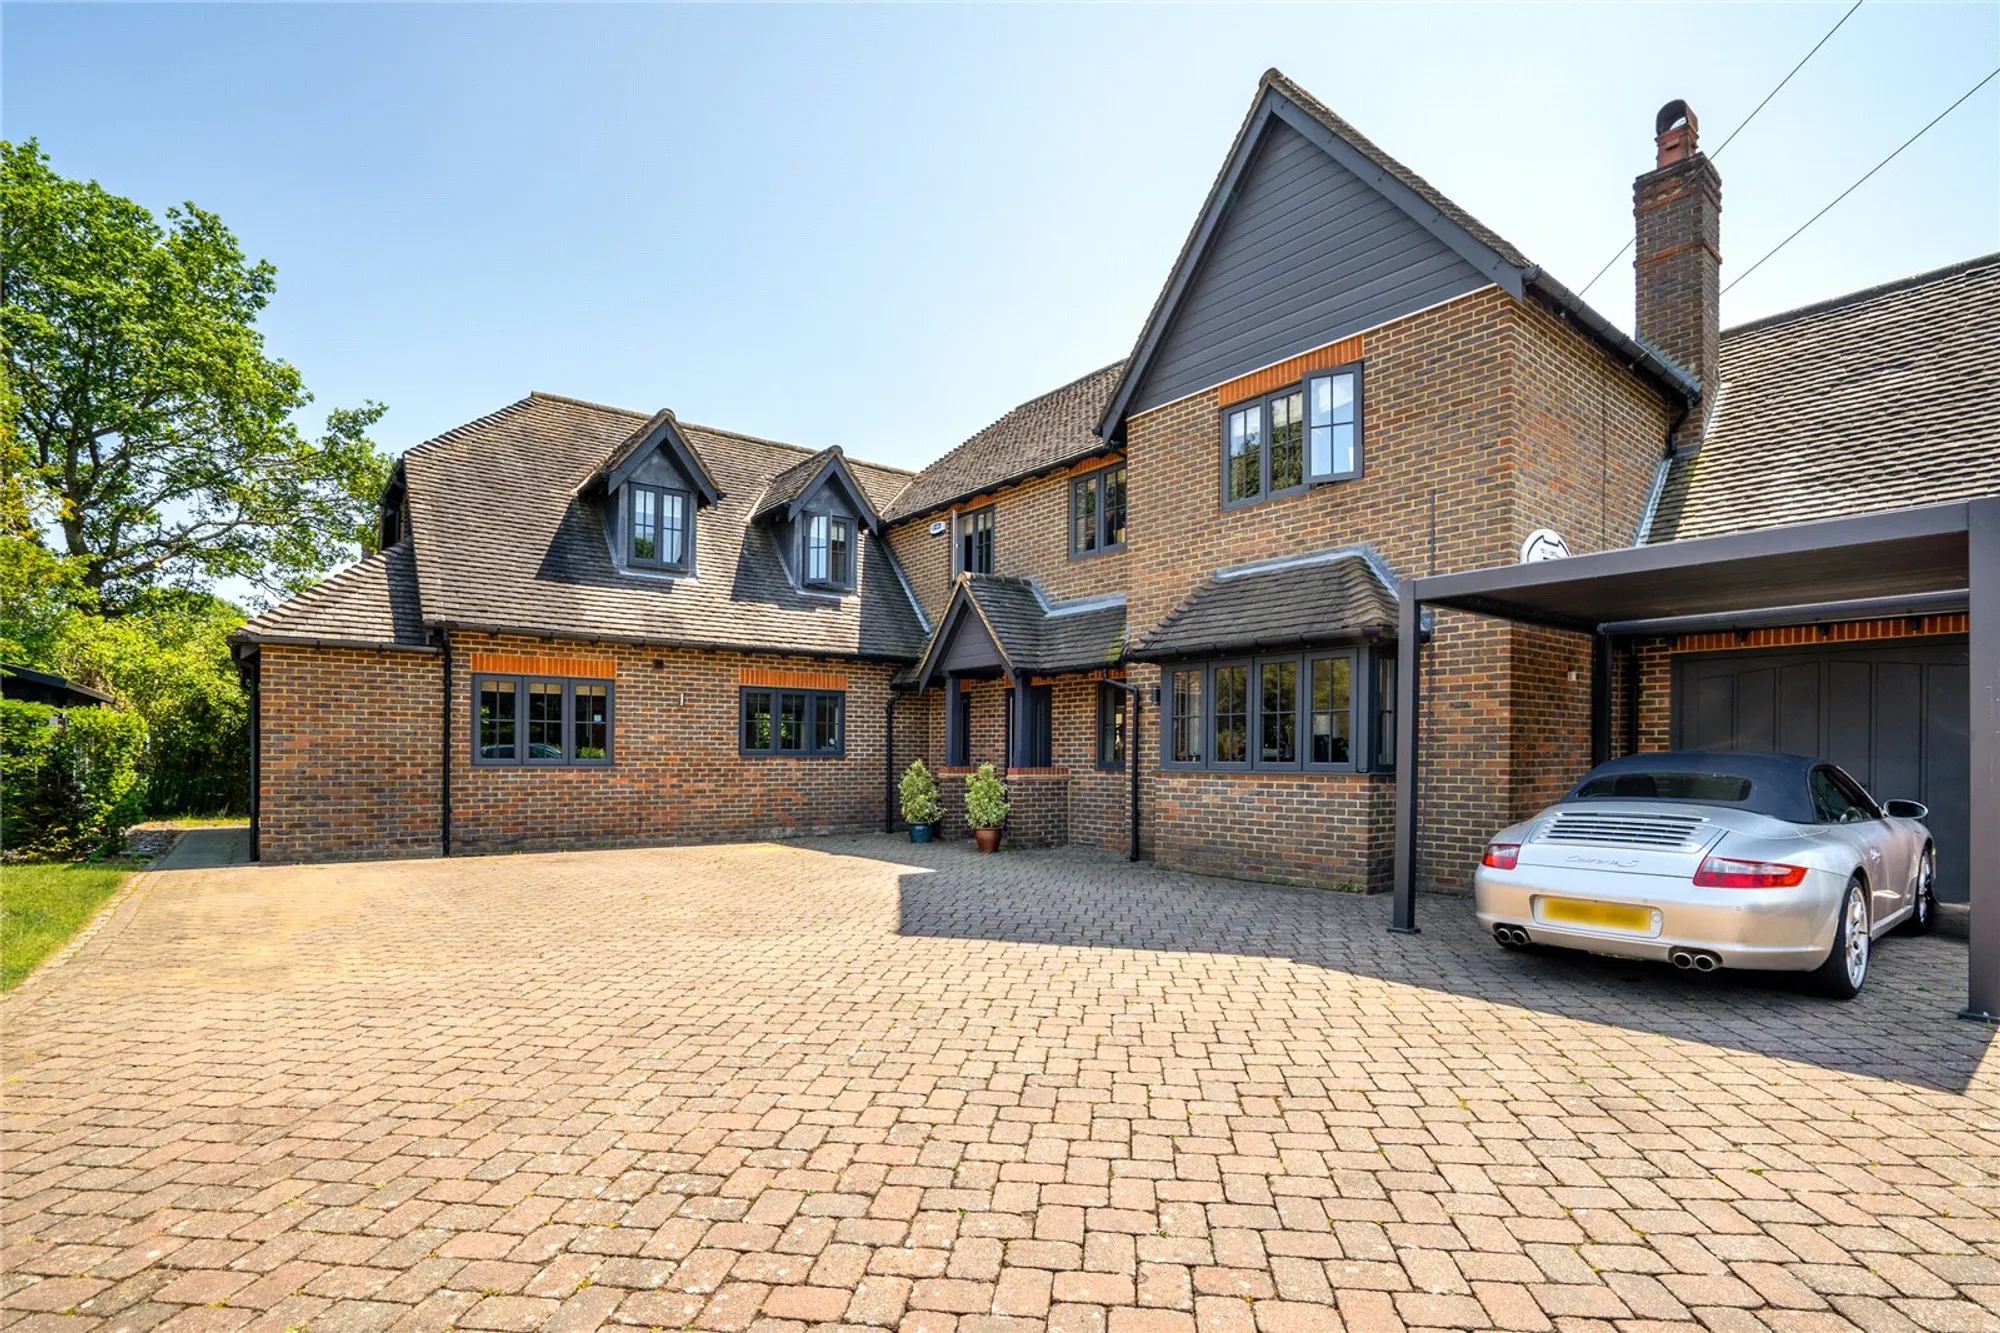 5 bed detached house for sale in High Drive, Caterham  - Property Image 1